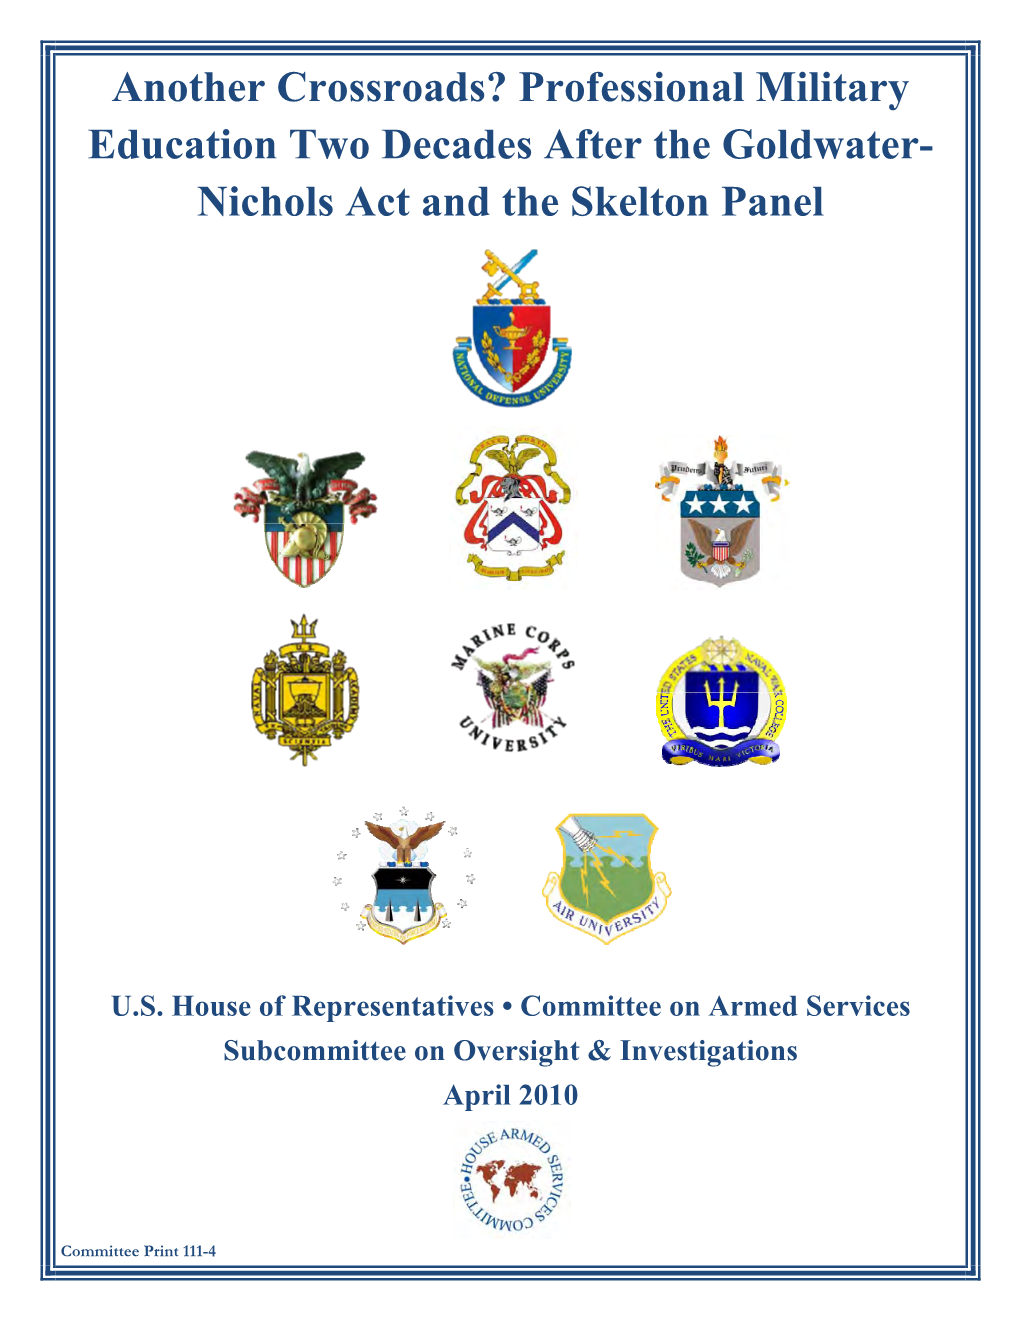 Professional Military Education Two Decades After the Goldwater- Nichols Act and the Skelton Panel